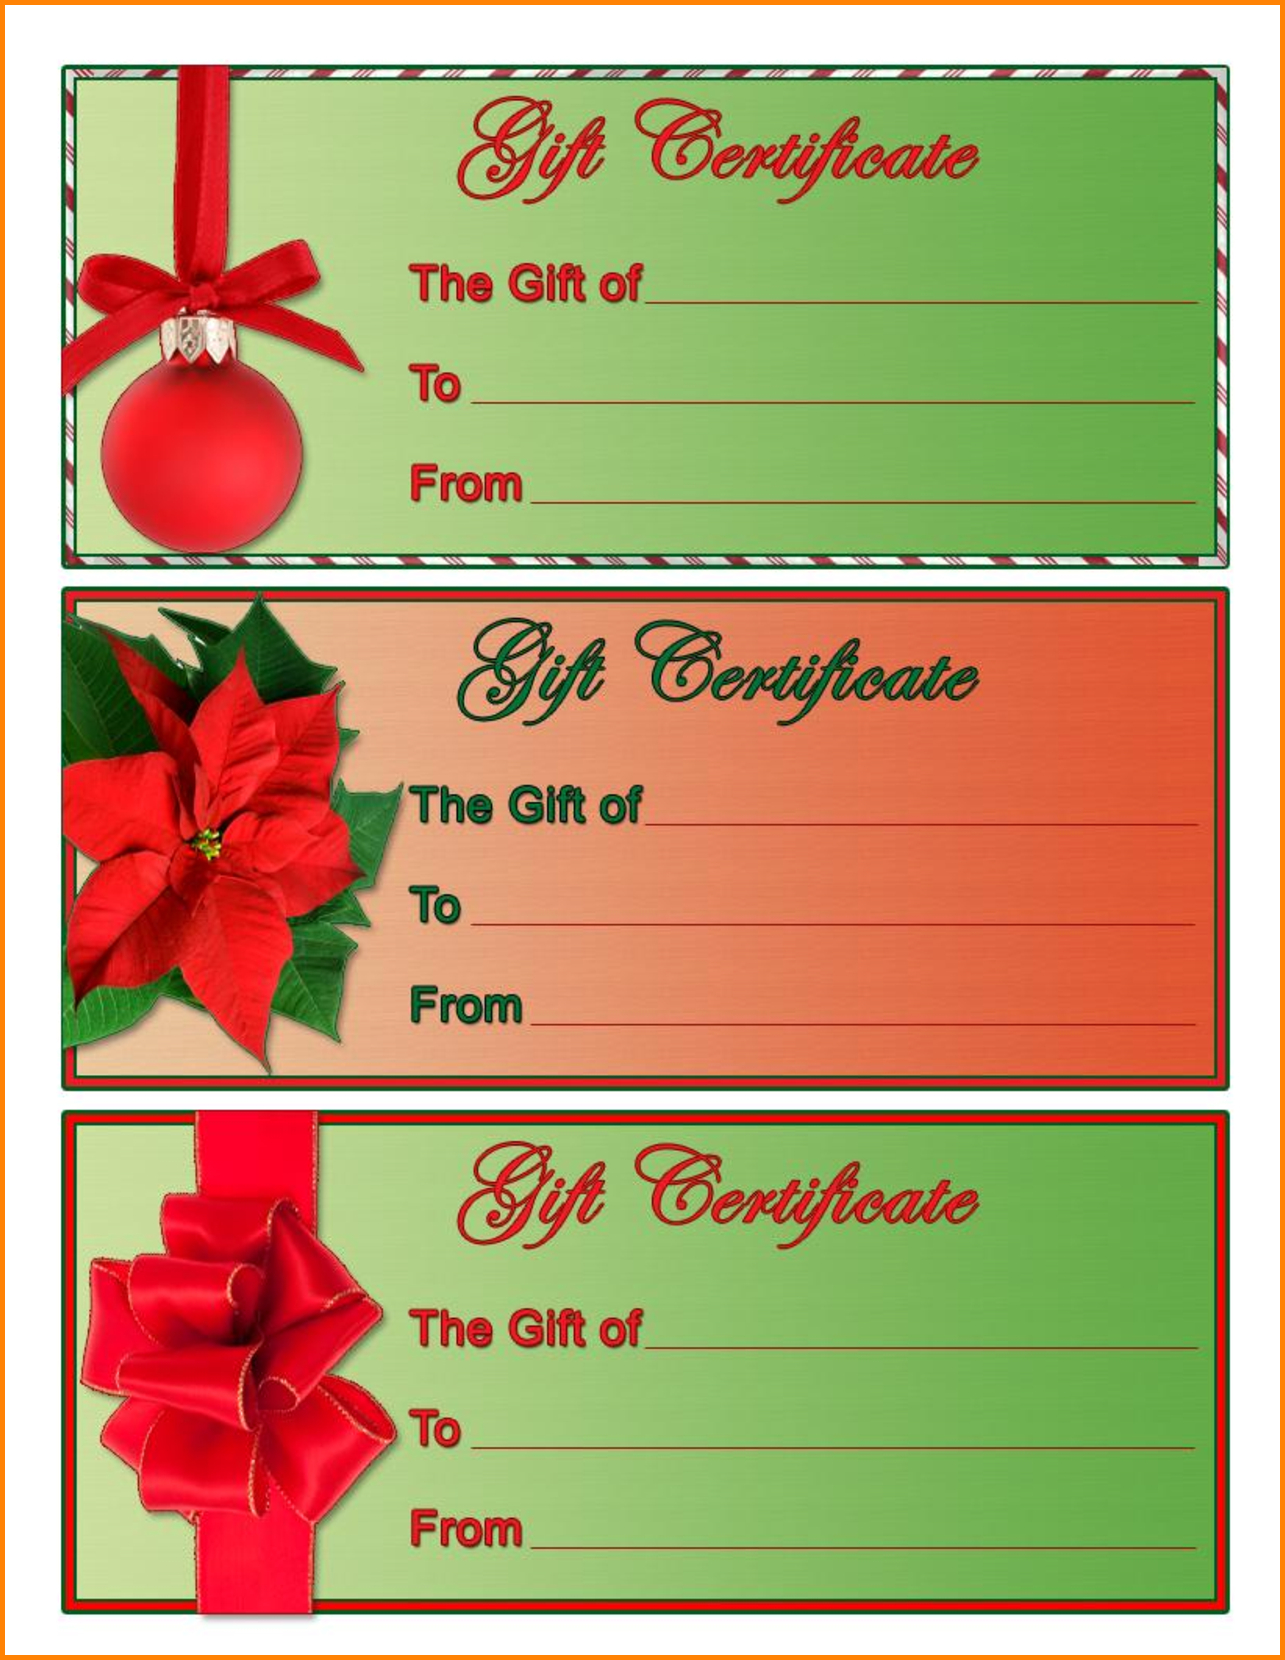 7+ Christmas Gift Certificate Template Free Download | Memo Throughout Christmas Gift Certificate Template Free Download